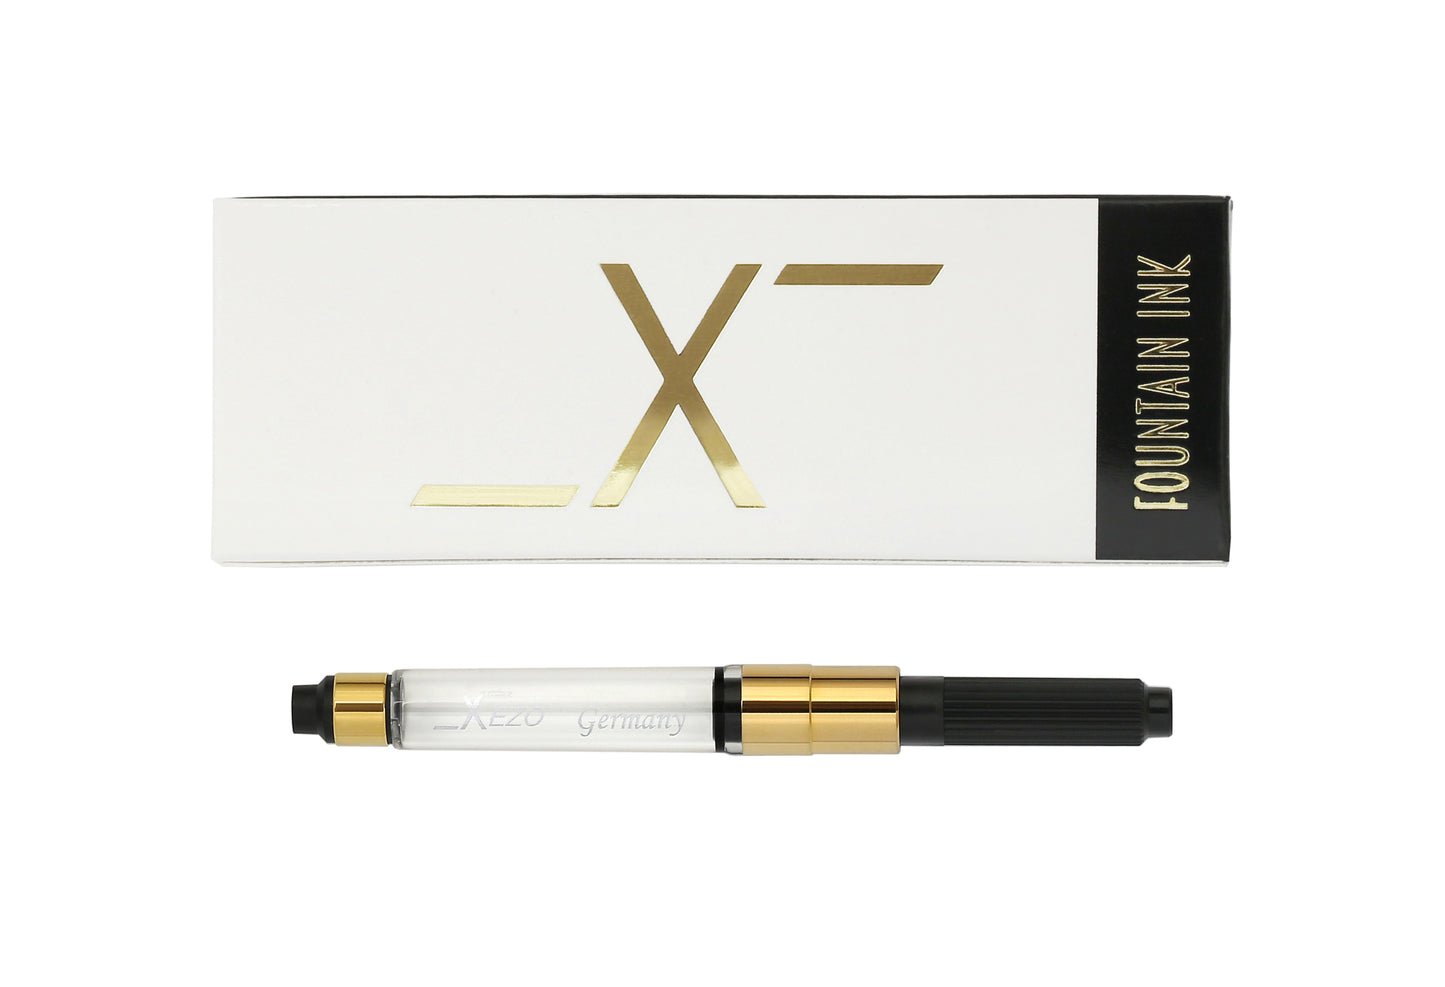 Gold-plated fountain ink converter for Xezo fountain pens and a Xezo fountain ink box